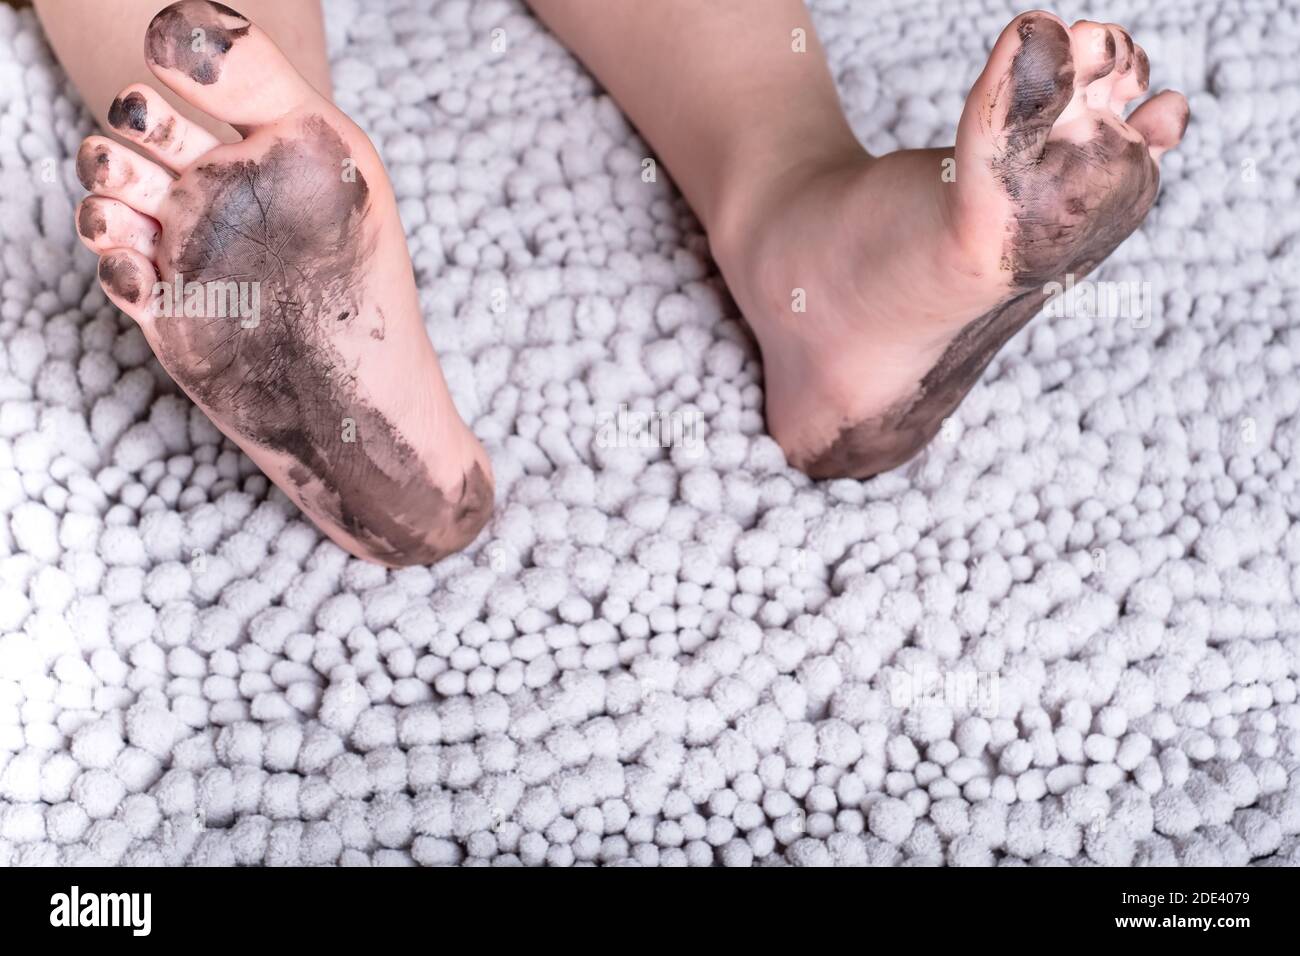 dirty kid feet on a fluffy mat.daily life dirty stain for wash and clean concept Stock Photo